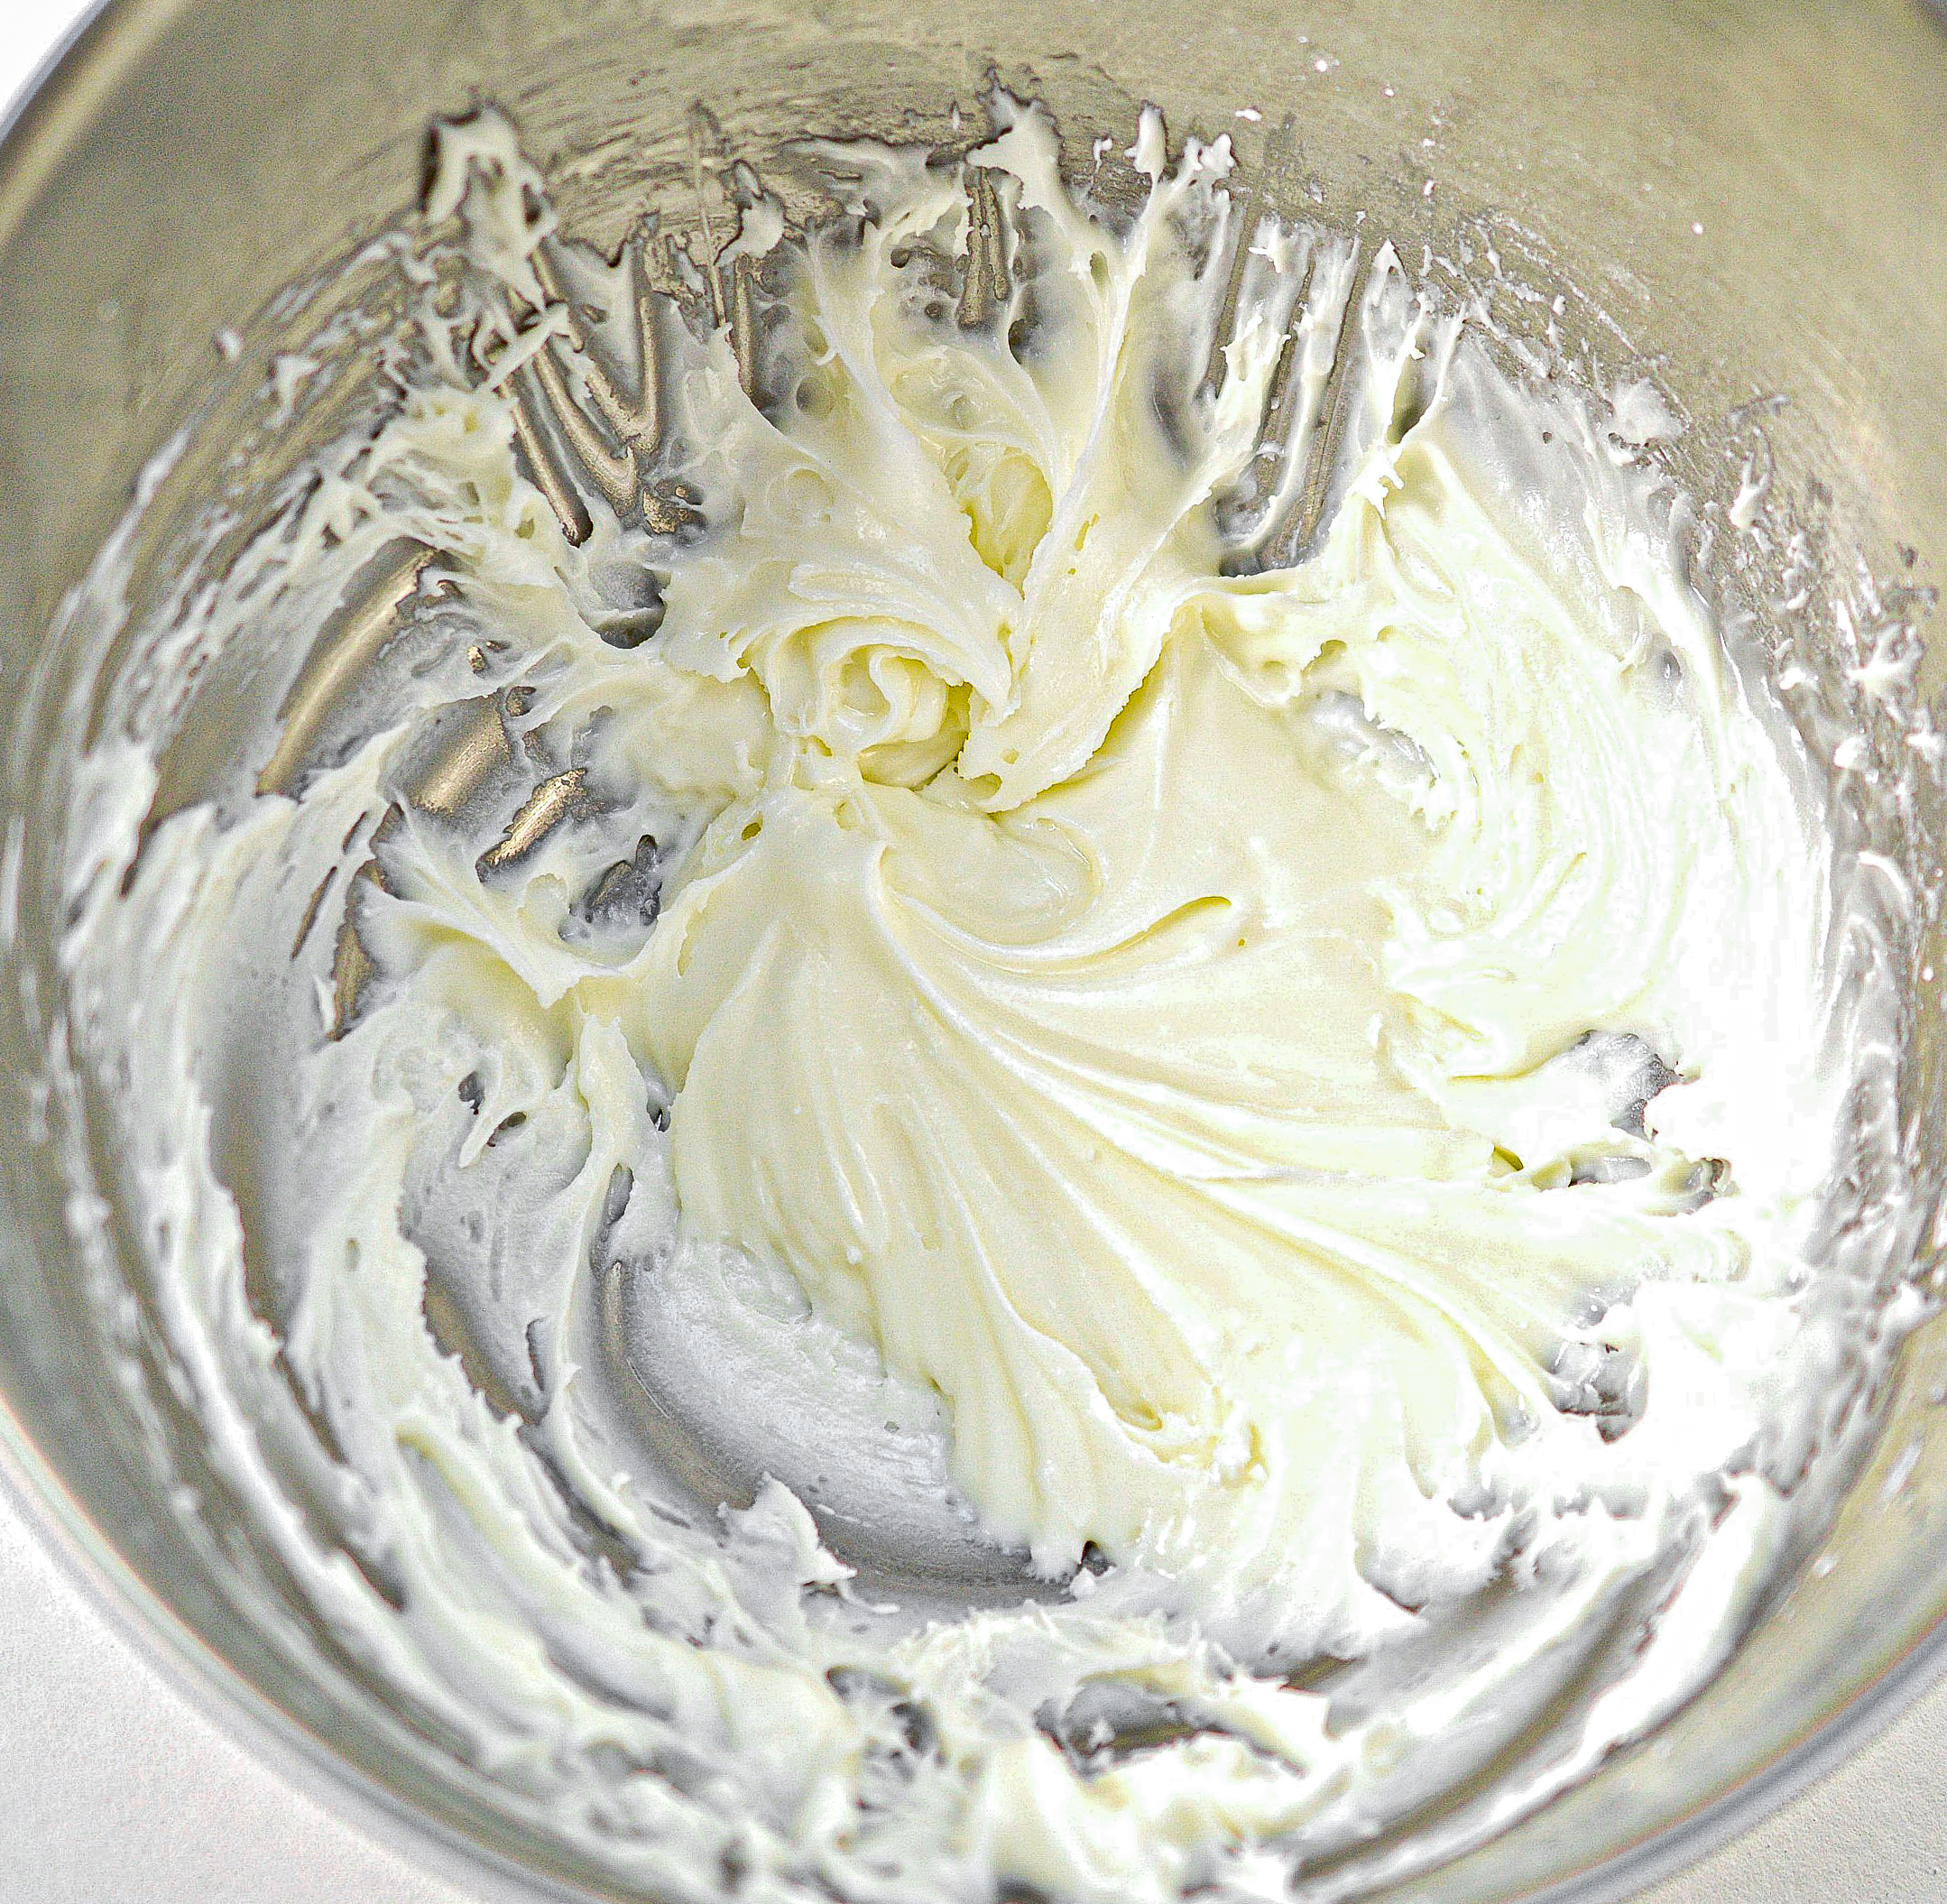 In another mixing bowl, combine the butter-sugar, and vanilla, and beat until fluffy.